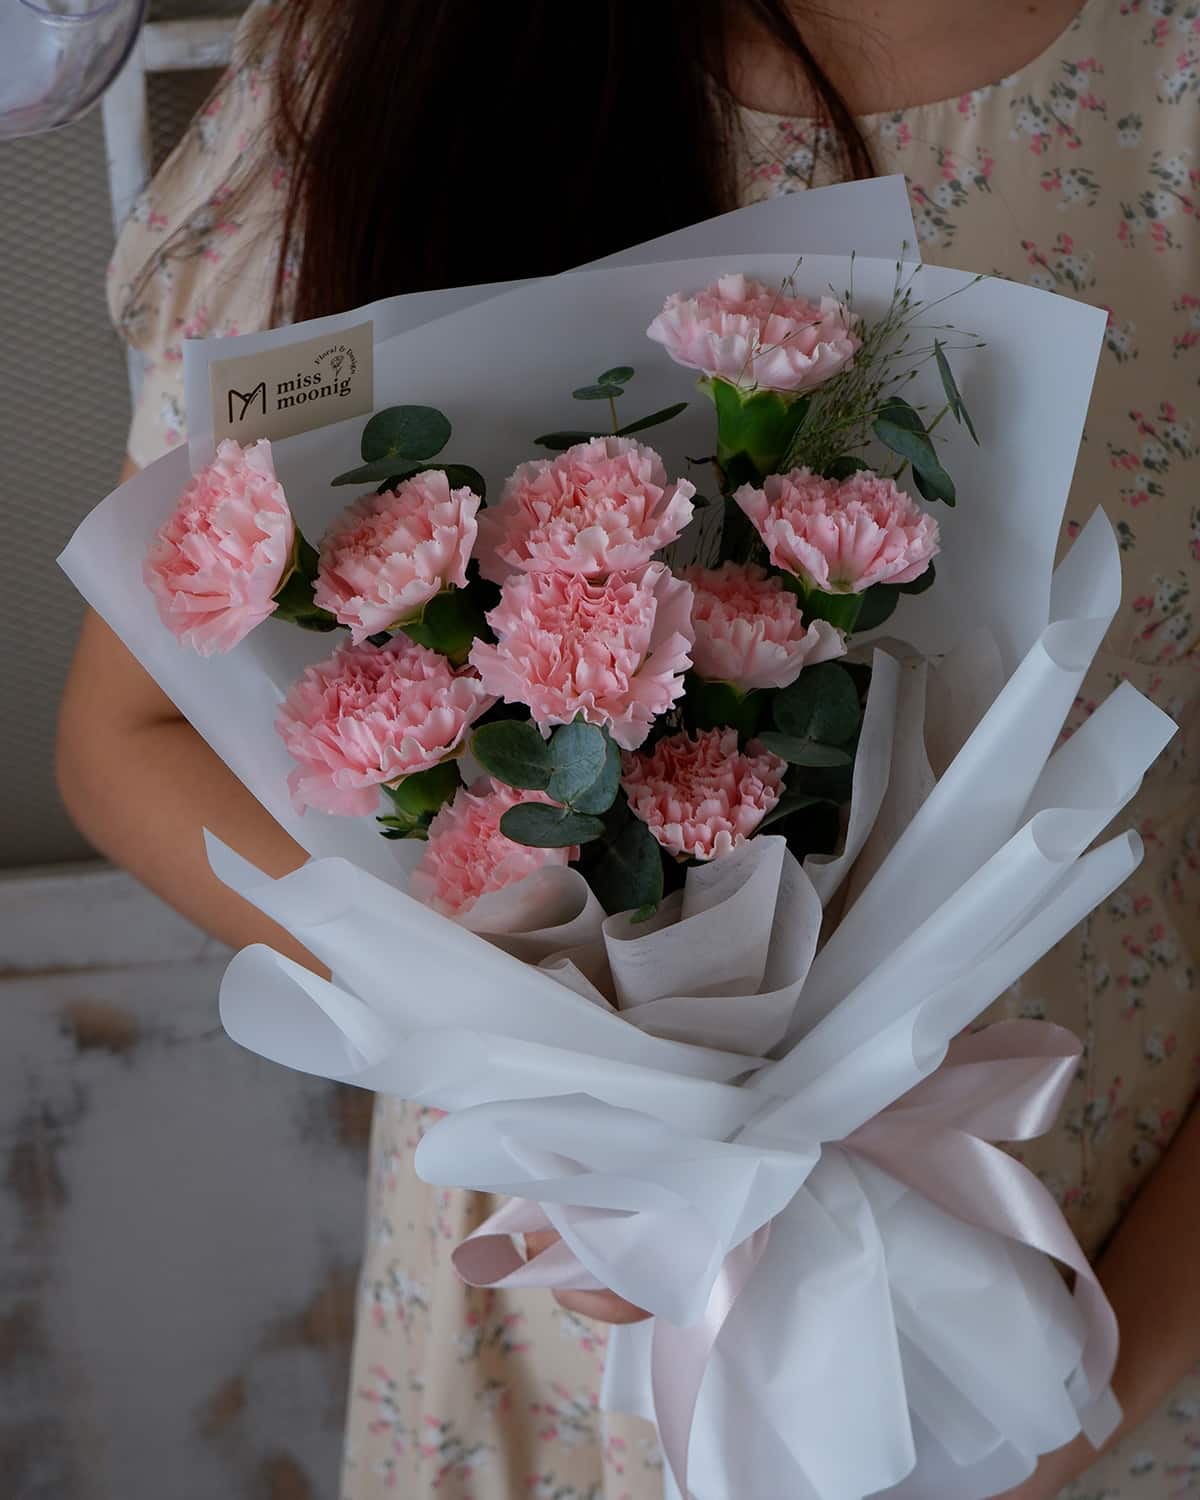 KL online flower delivery, Mothers day flower, Carnations flower bouquet